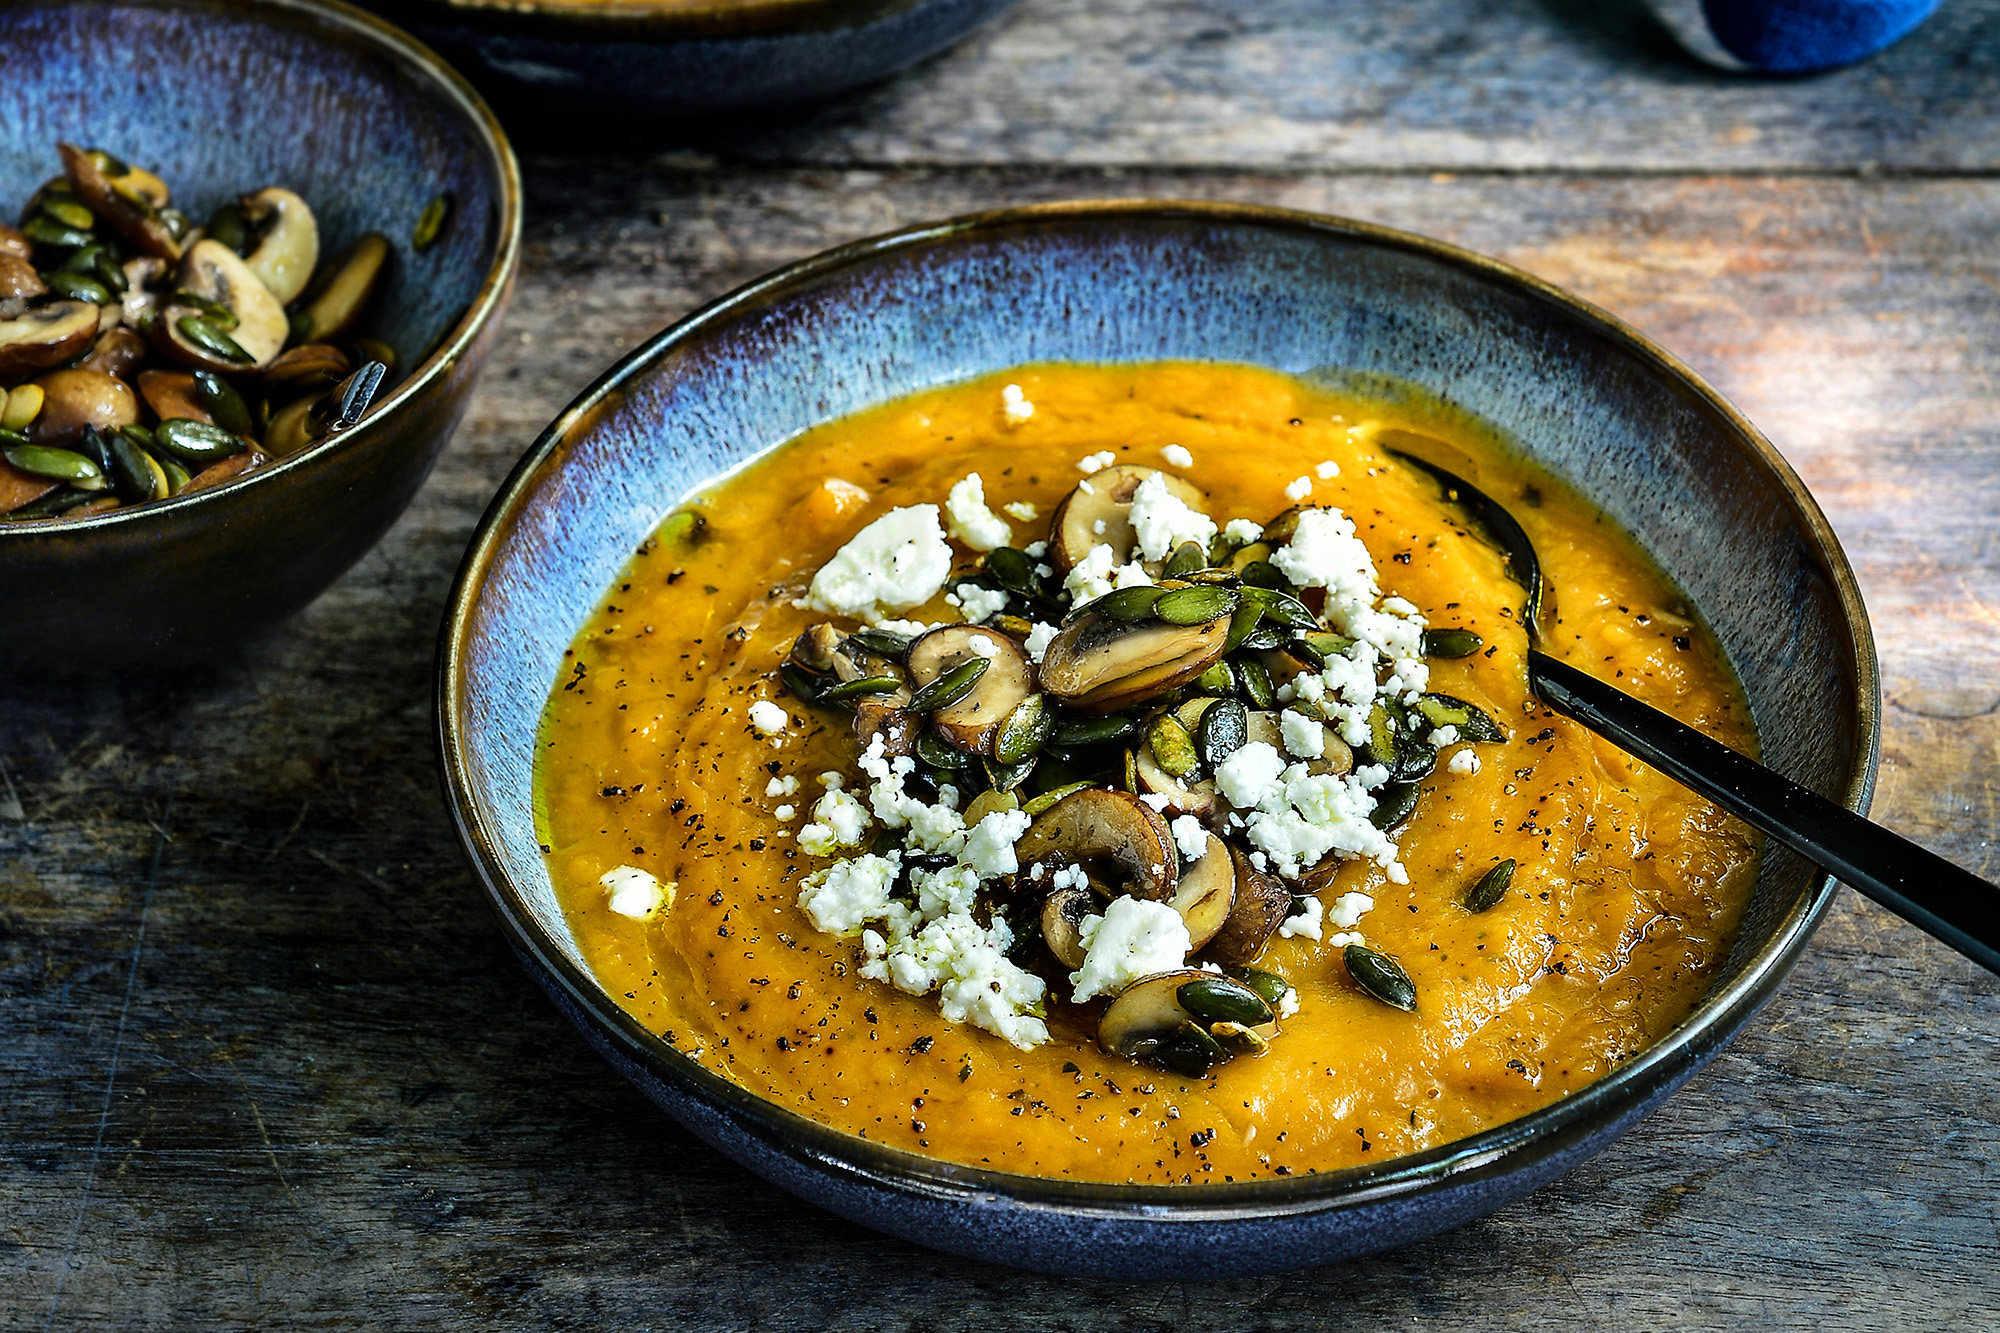 Pumpkin soup with mushrooms and feta cheese